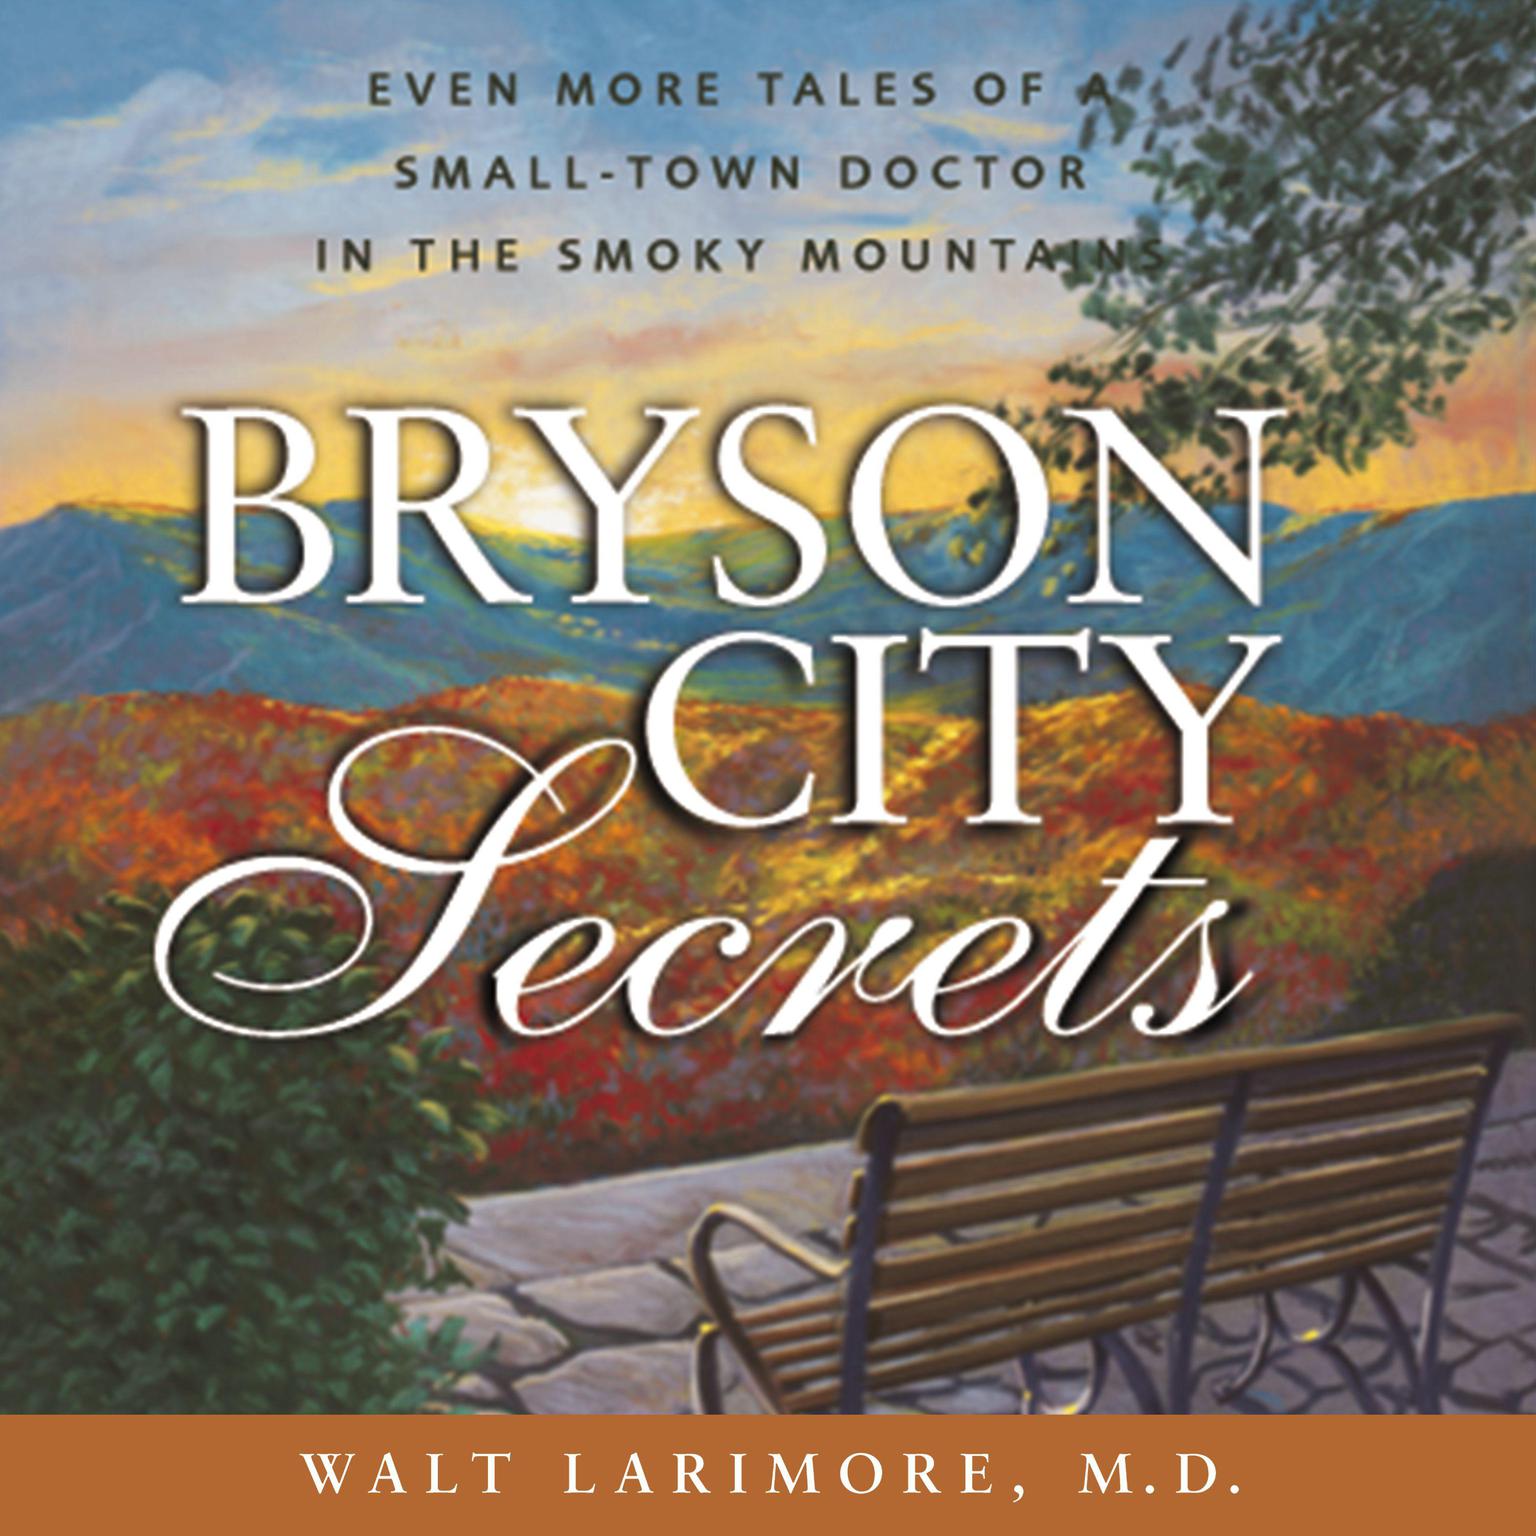 Bryson City Secrets: Even More Tales of a Small-Town Doctor in the Smoky Mountains Audiobook, by Walt Larimore